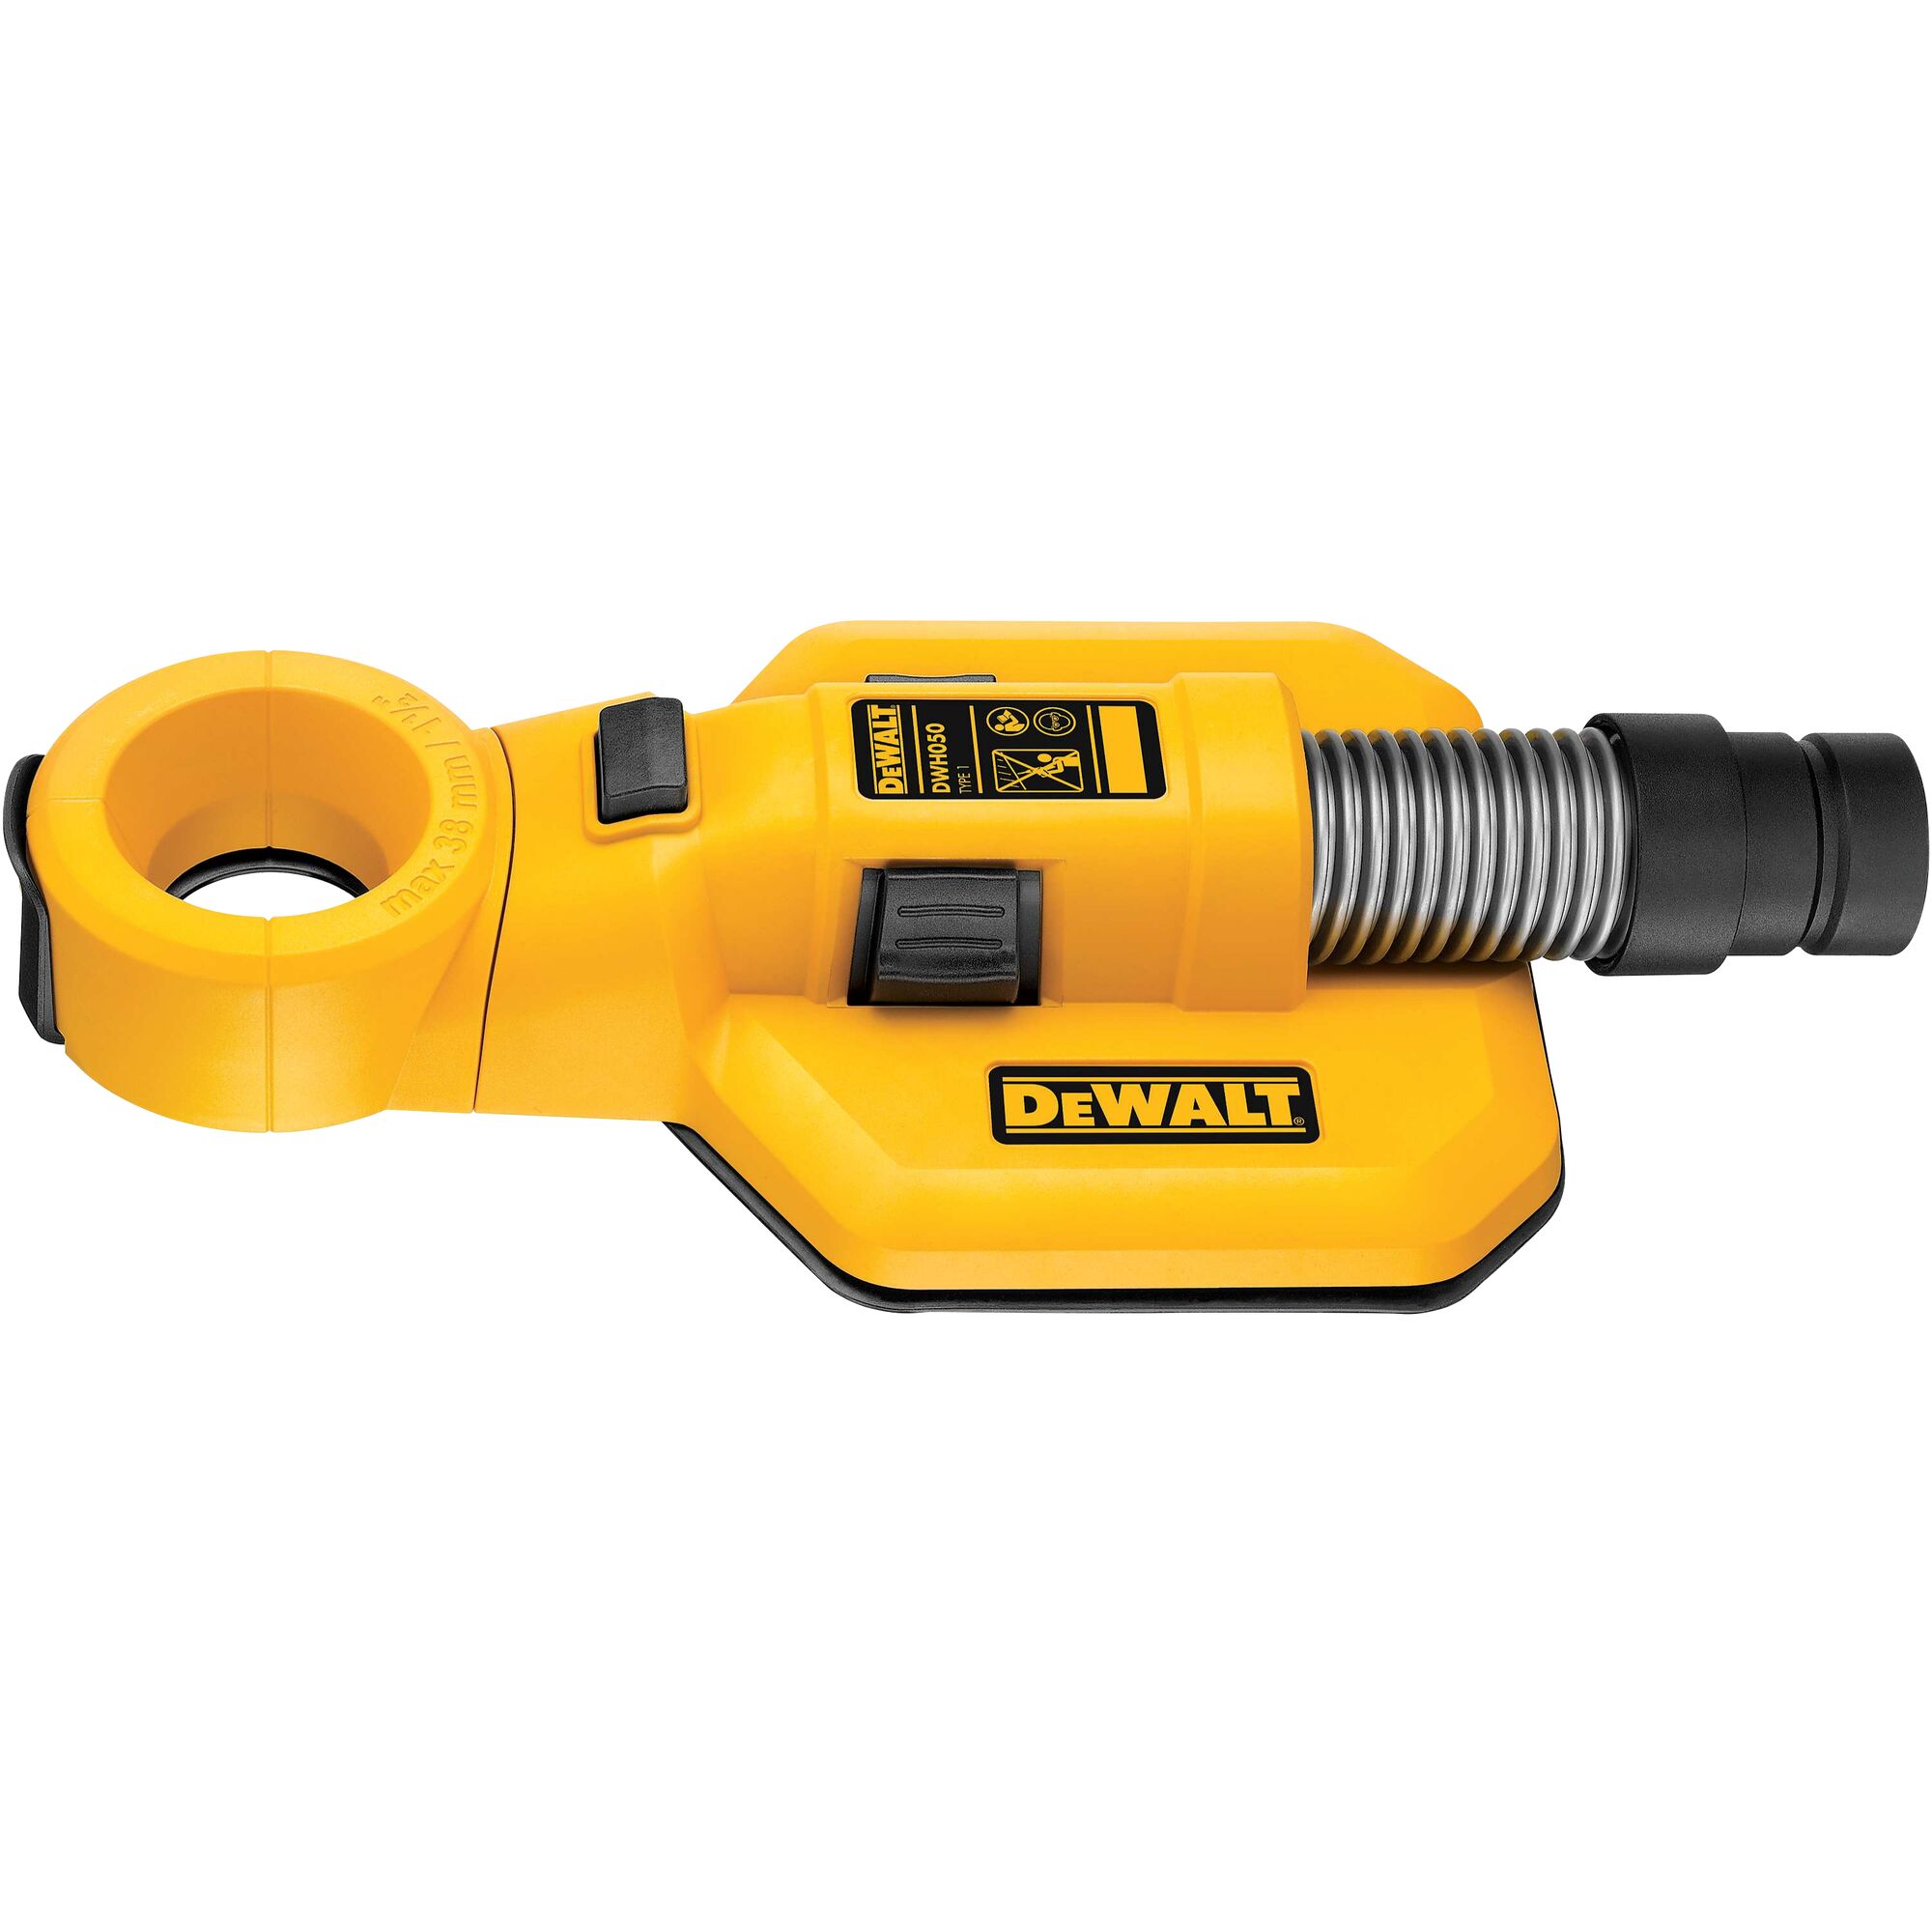 DEWALT DWH050K Large Hammer Drilling Dust Extraction System ， Yellow-